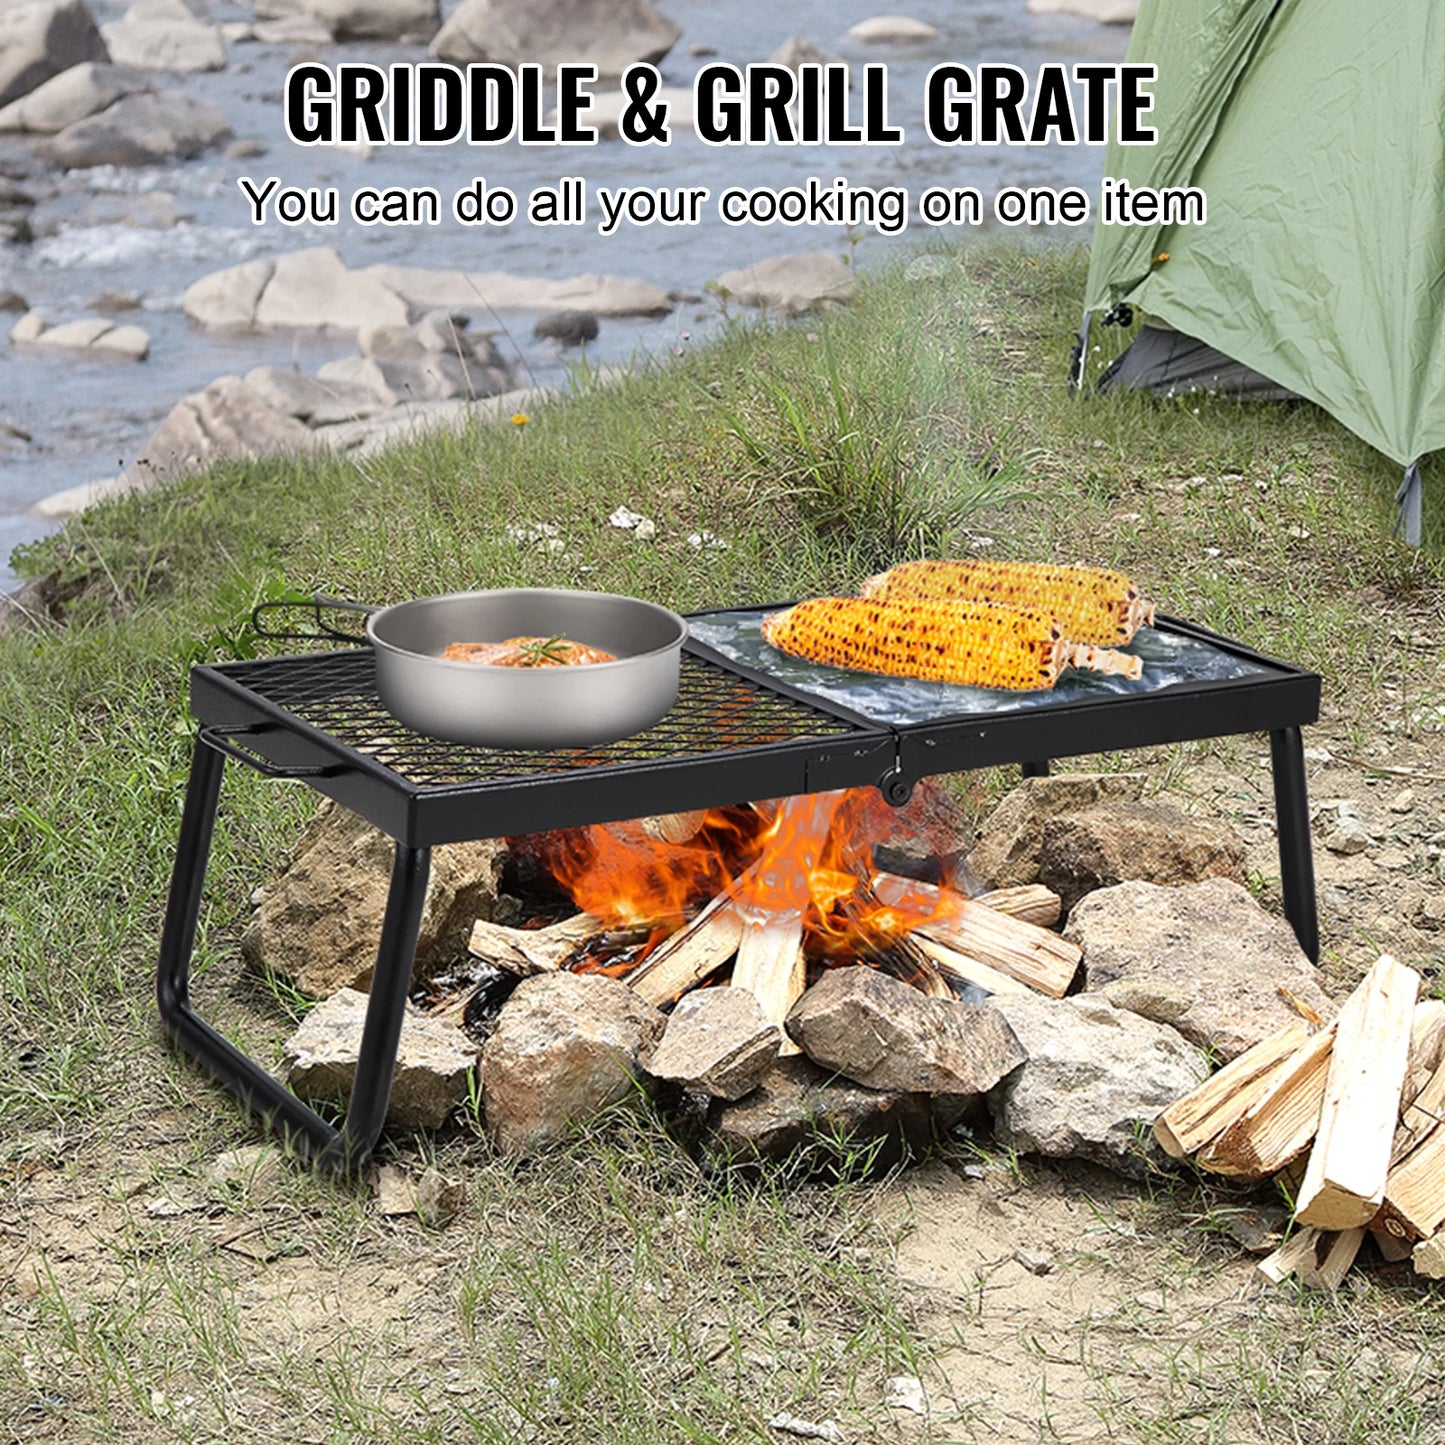 VEVOR Folding Campfire Grill, Portable Camping Grate